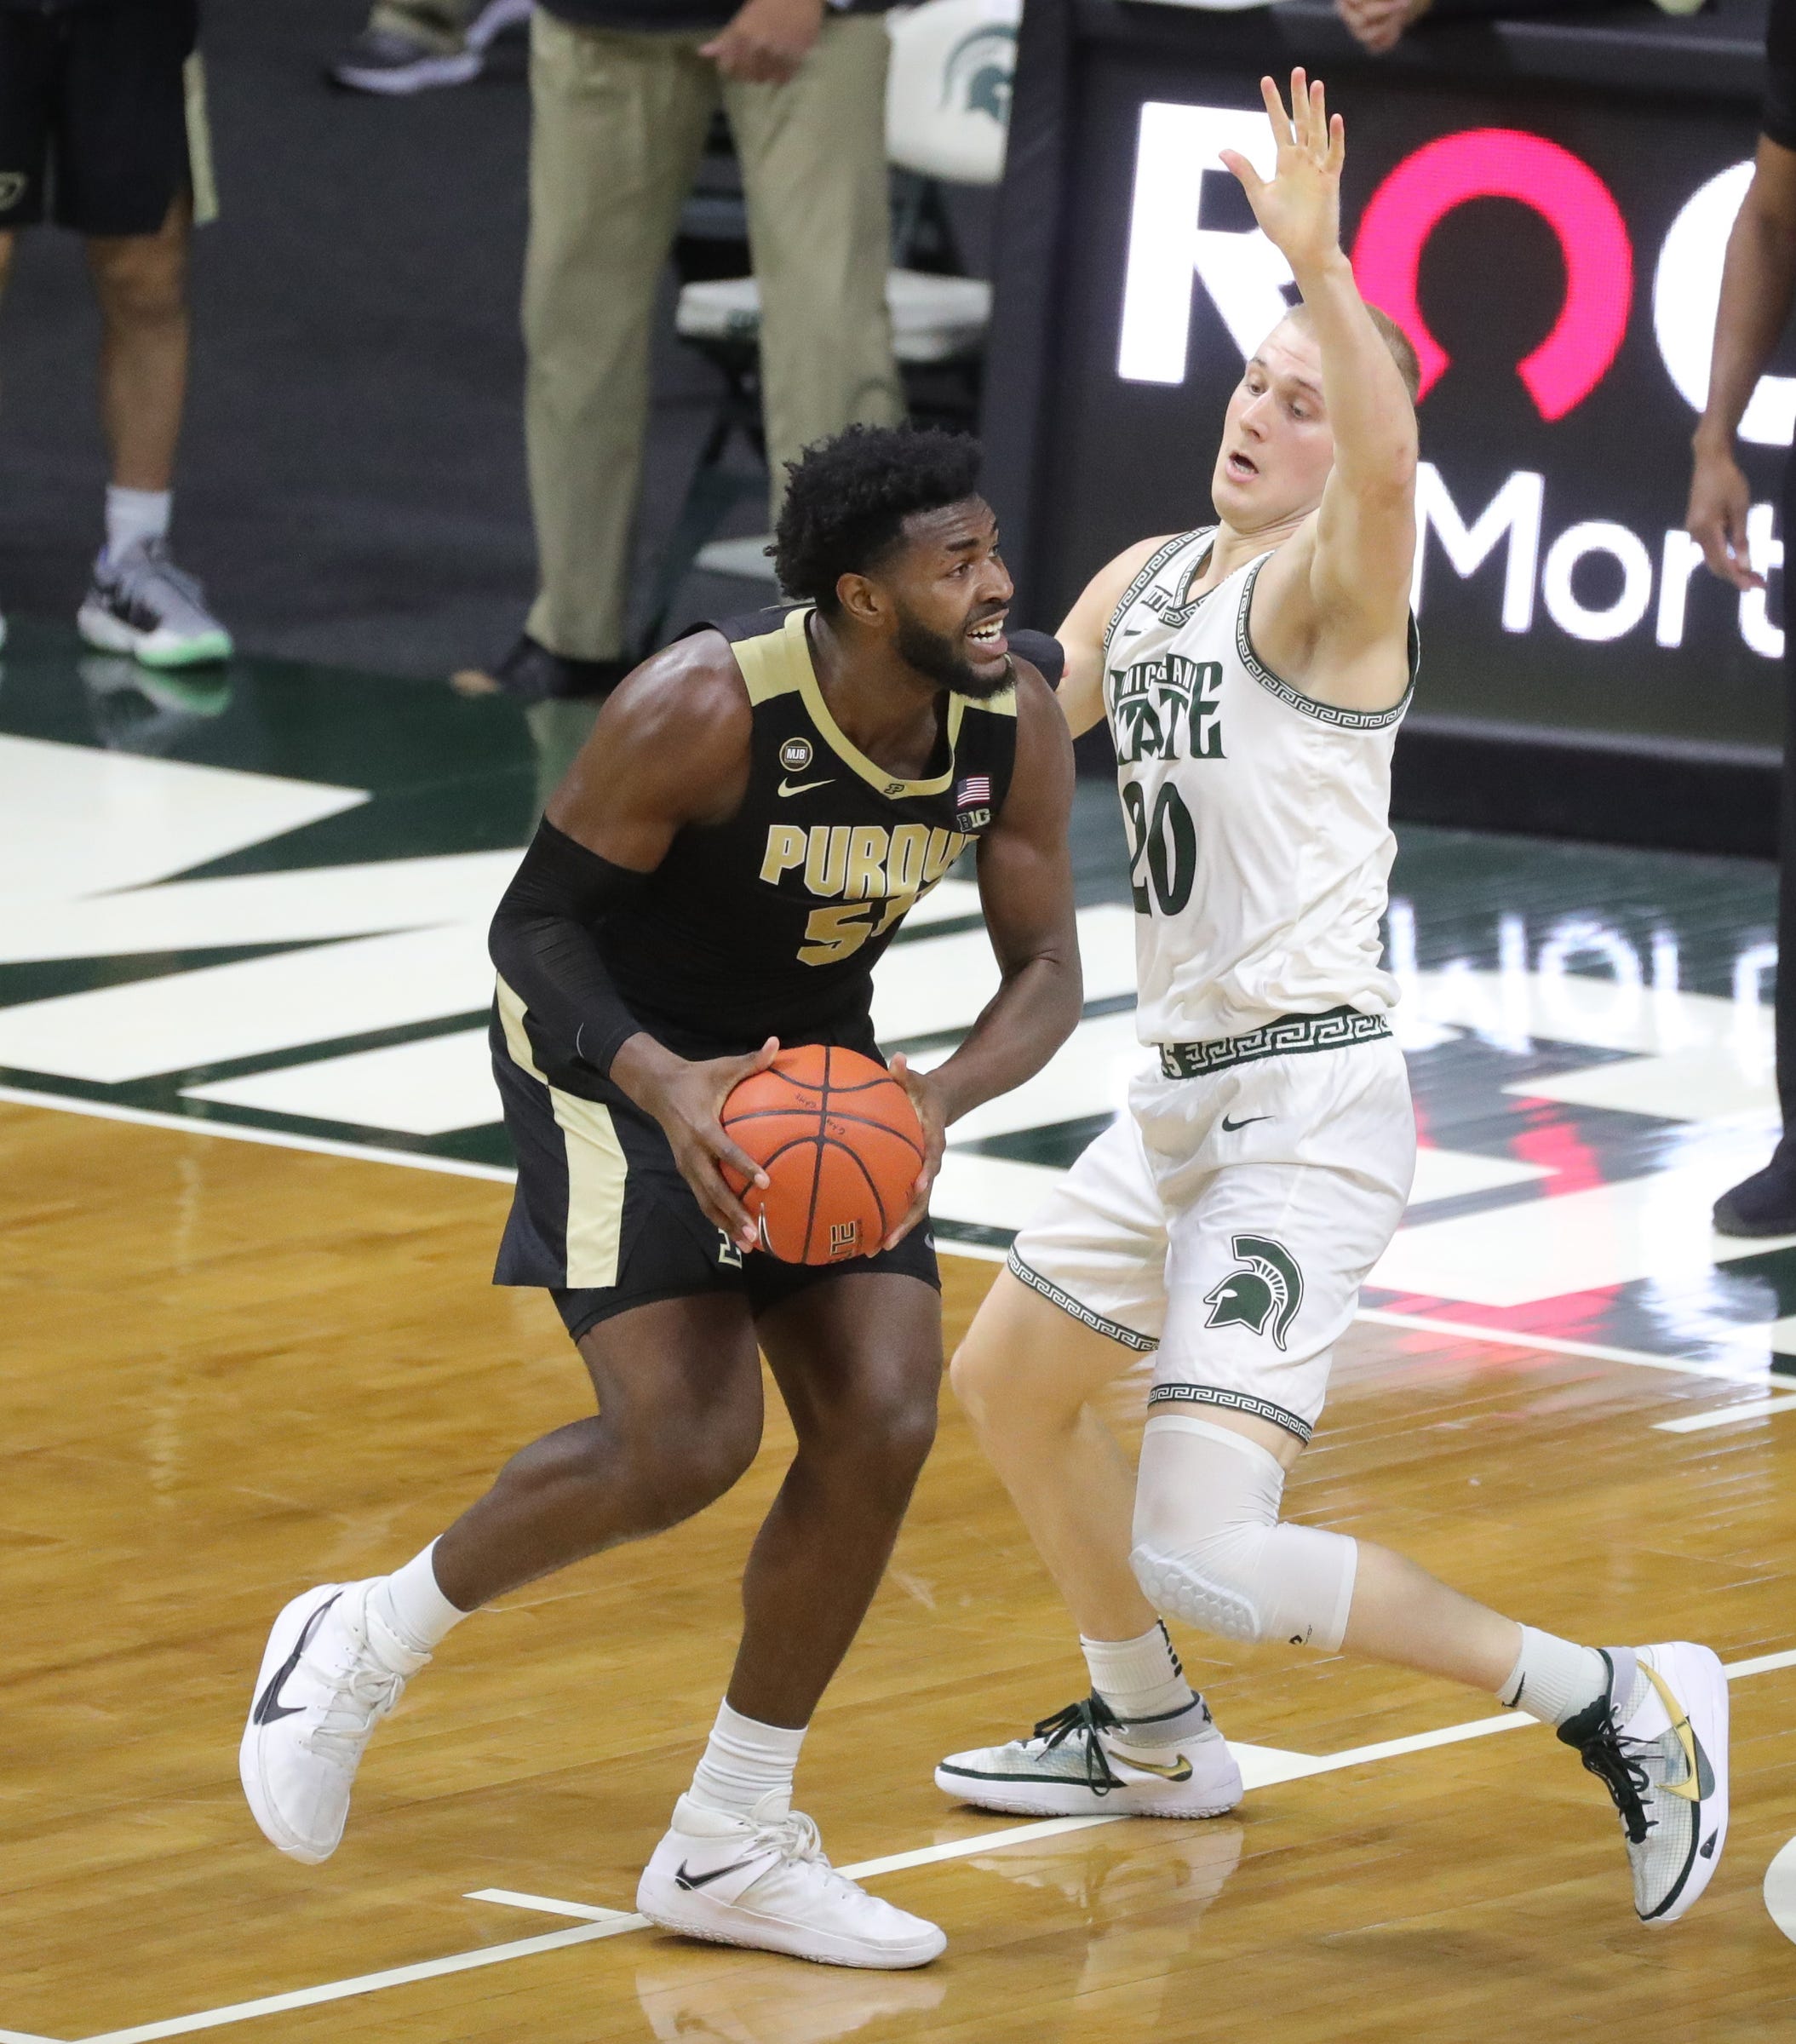 Michigan state striker Joy Hauser defends Purdue Boilermakers Trevion Williams during the second half at Priceline Center in East Lansing, Friday Jan 8, 2021.